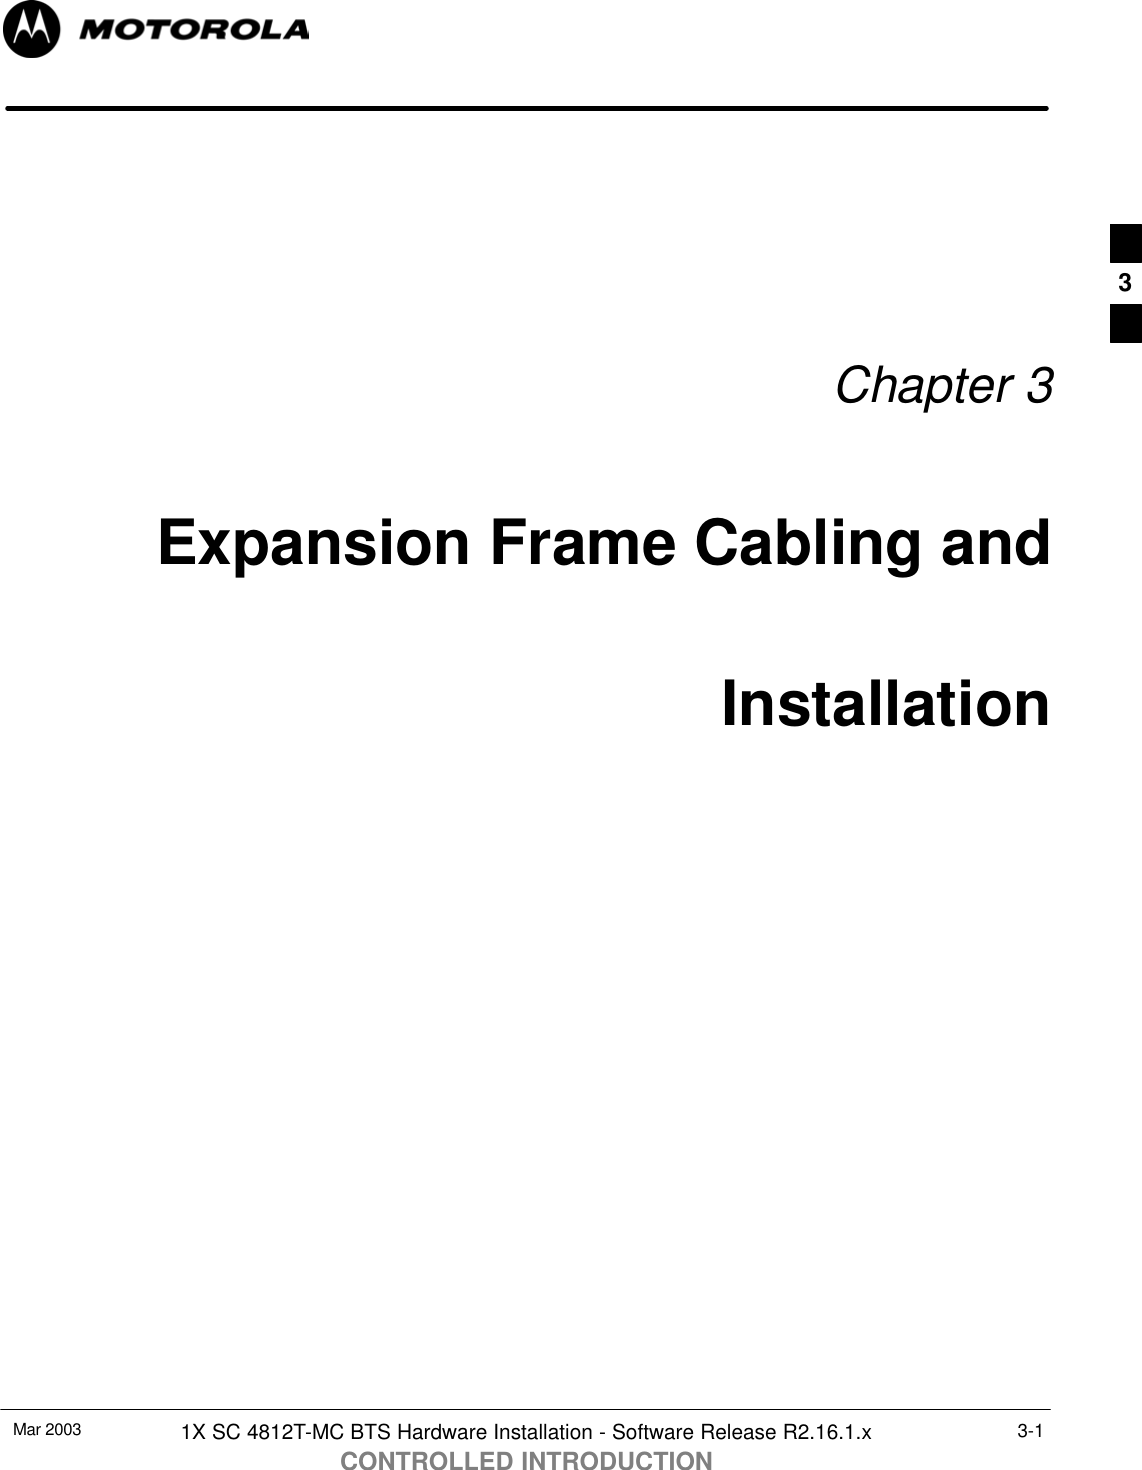 Mar 2003 1X SC 4812T-MC BTS Hardware Installation - Software Release R2.16.1.xCONTROLLED INTRODUCTION3-1Chapter 3Expansion Frame Cabling andInstallation3